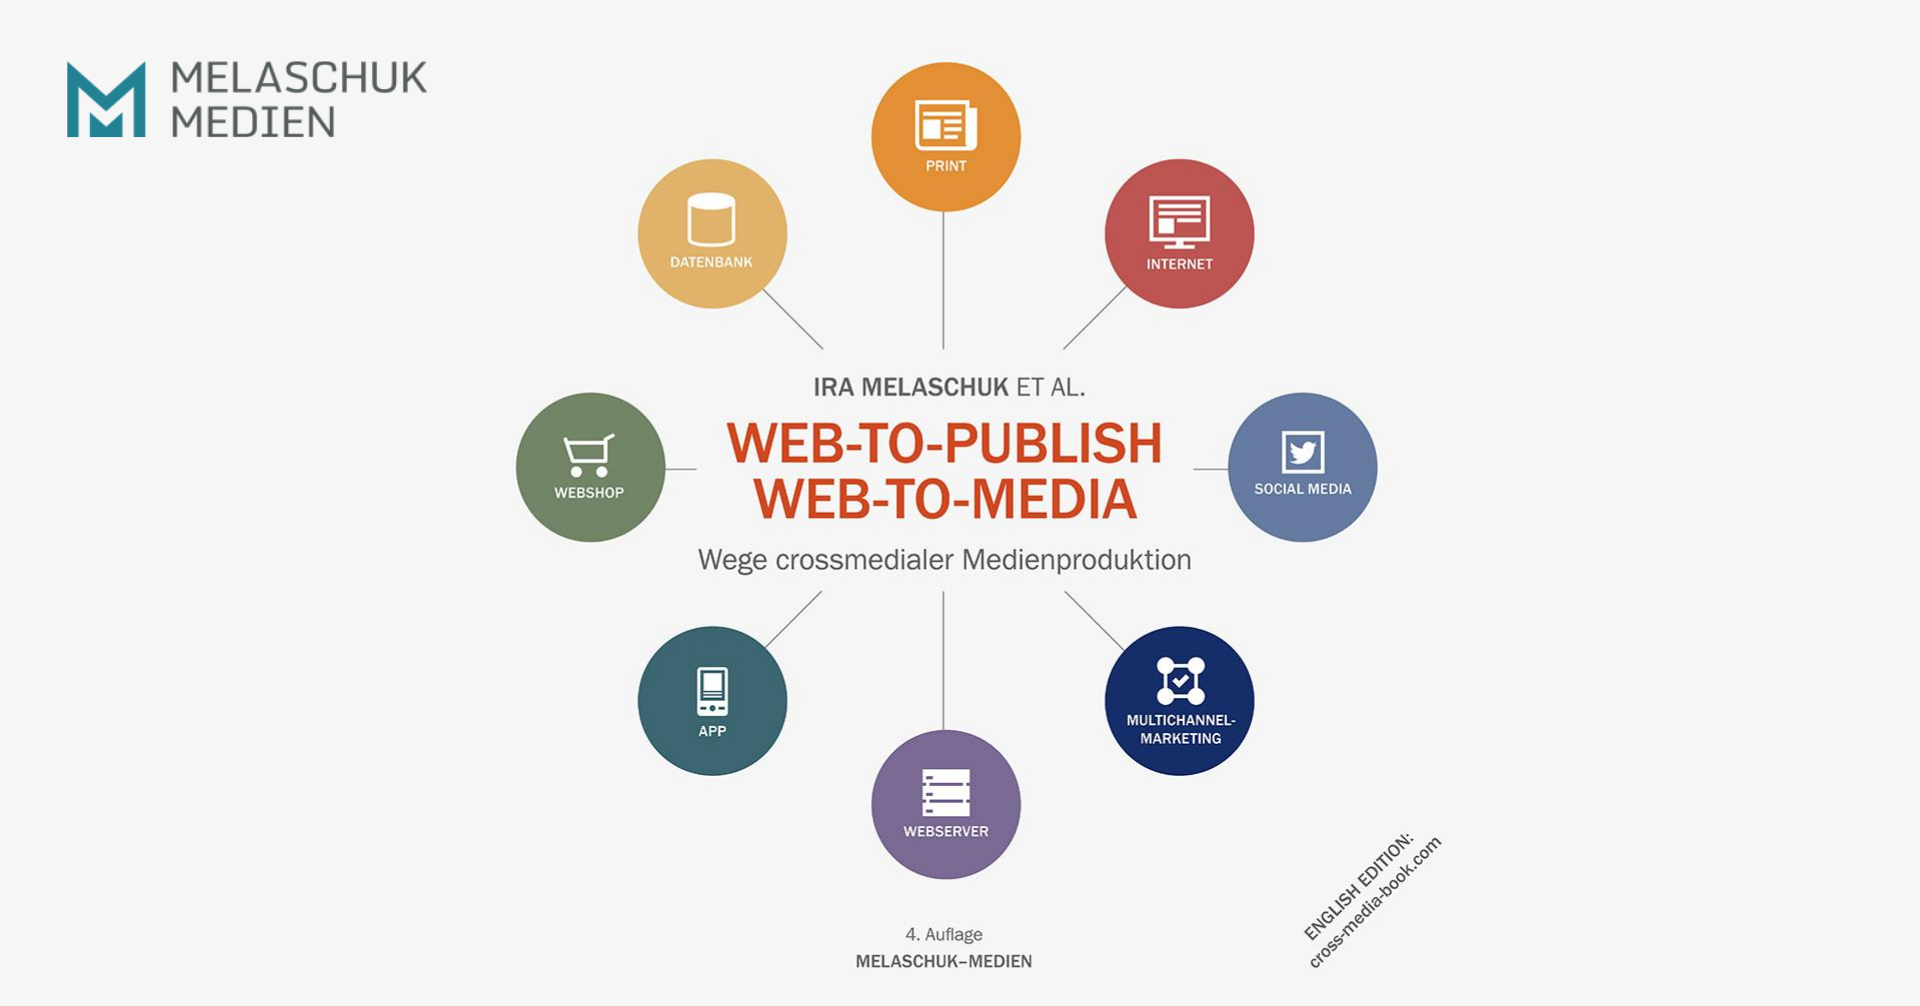 The guide for crossmedia and multichannel